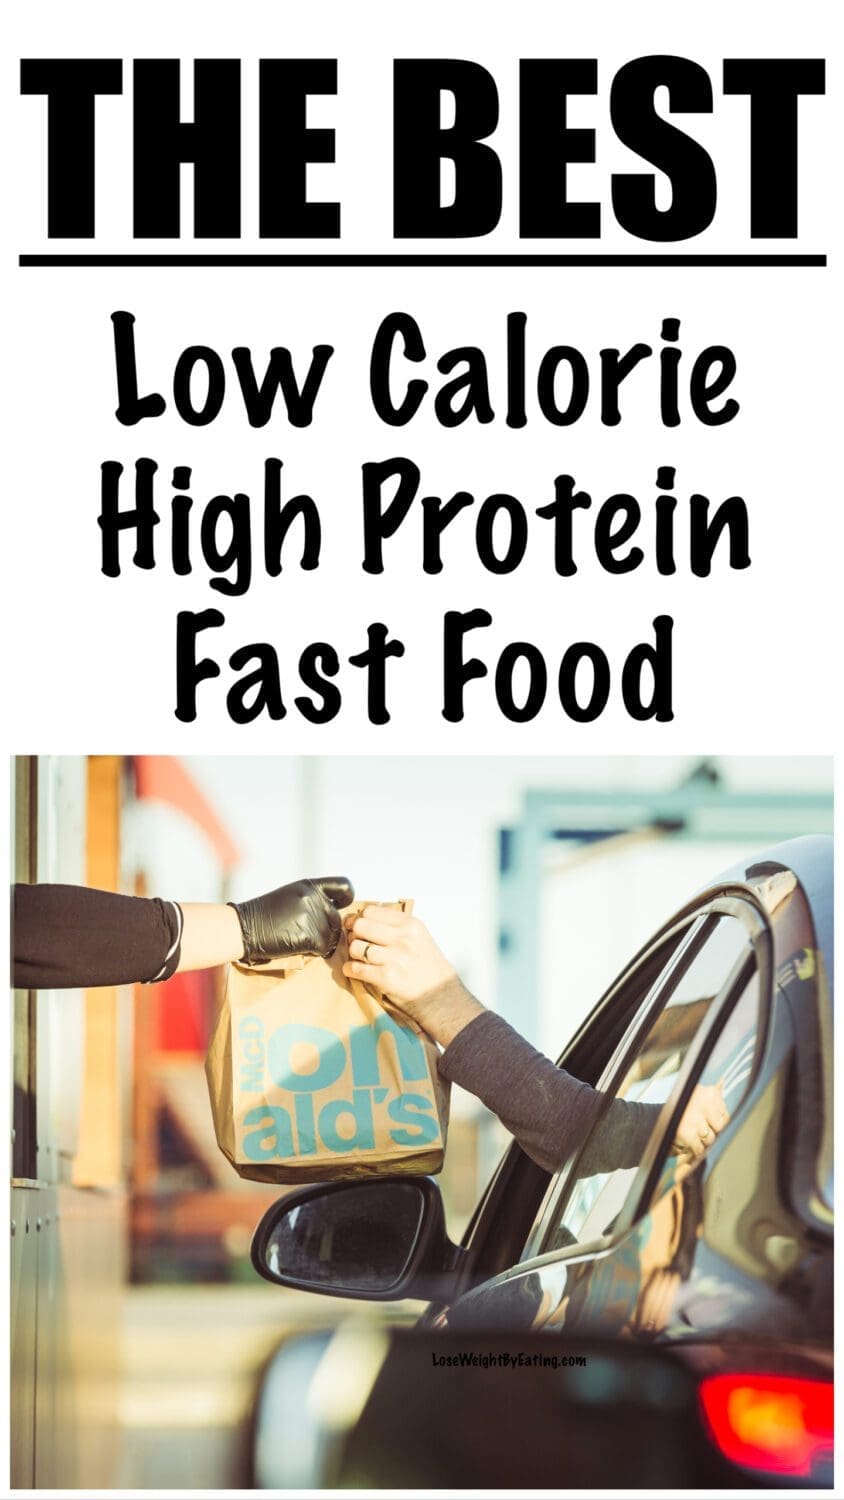 Low Calorie High Protein Fast Food